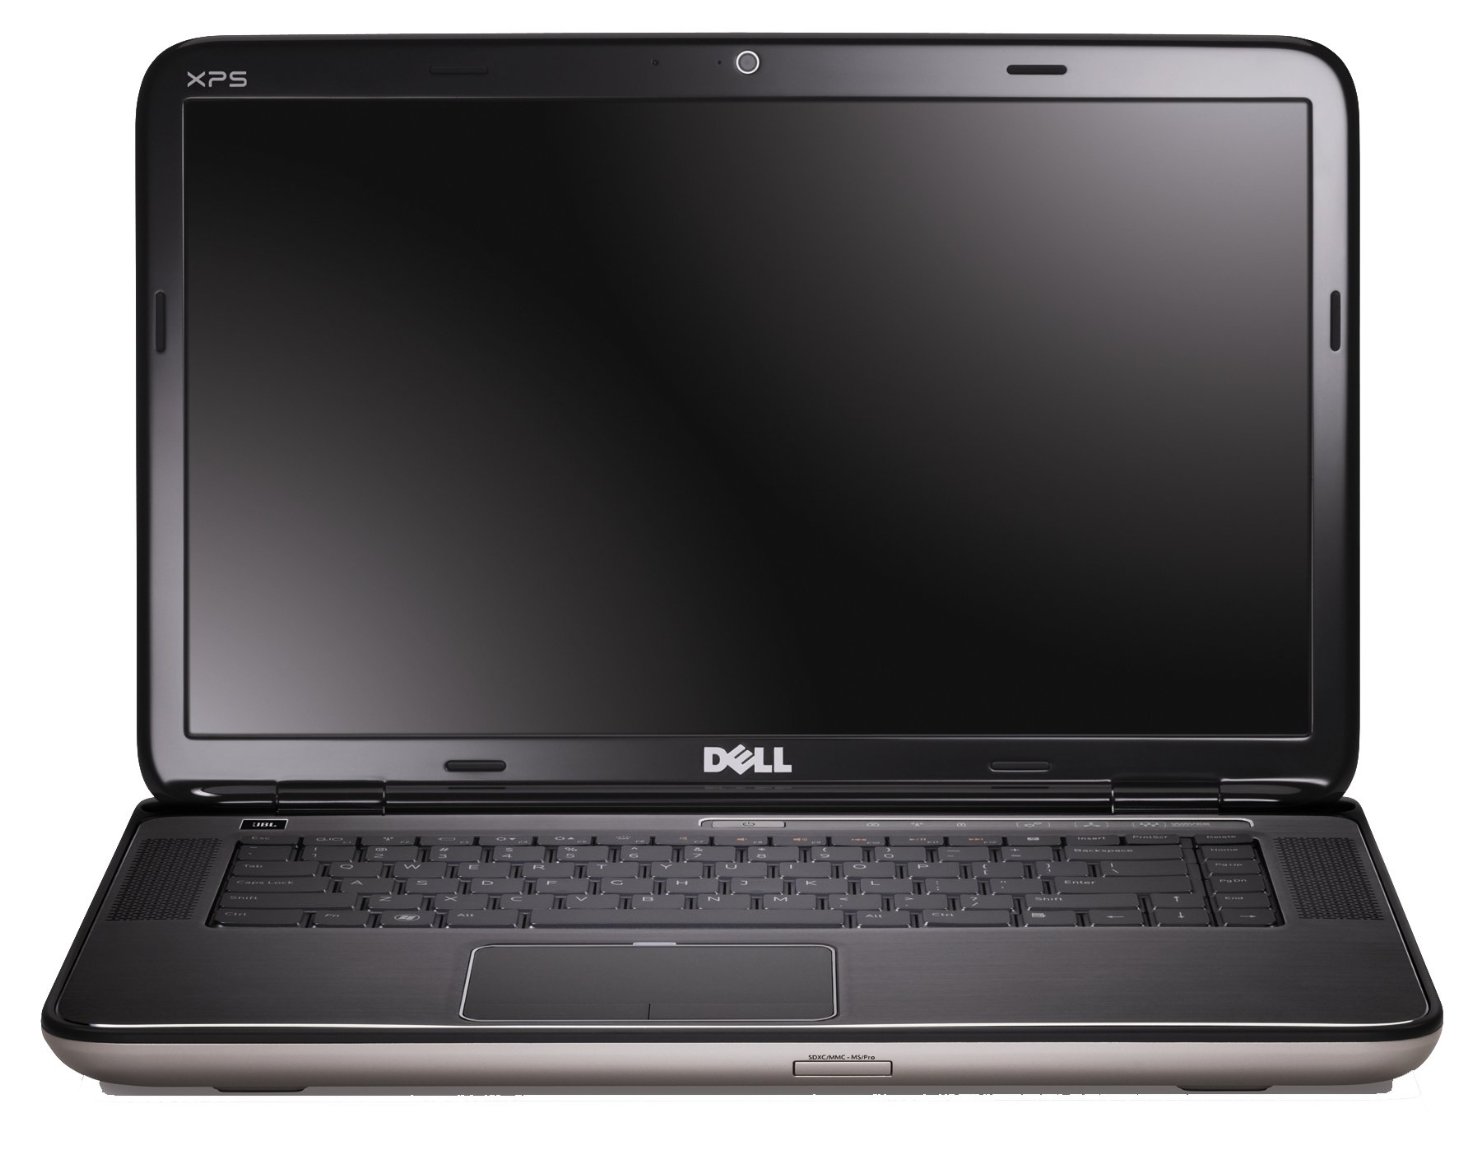  Dell XPS 15 9570-5413  #1